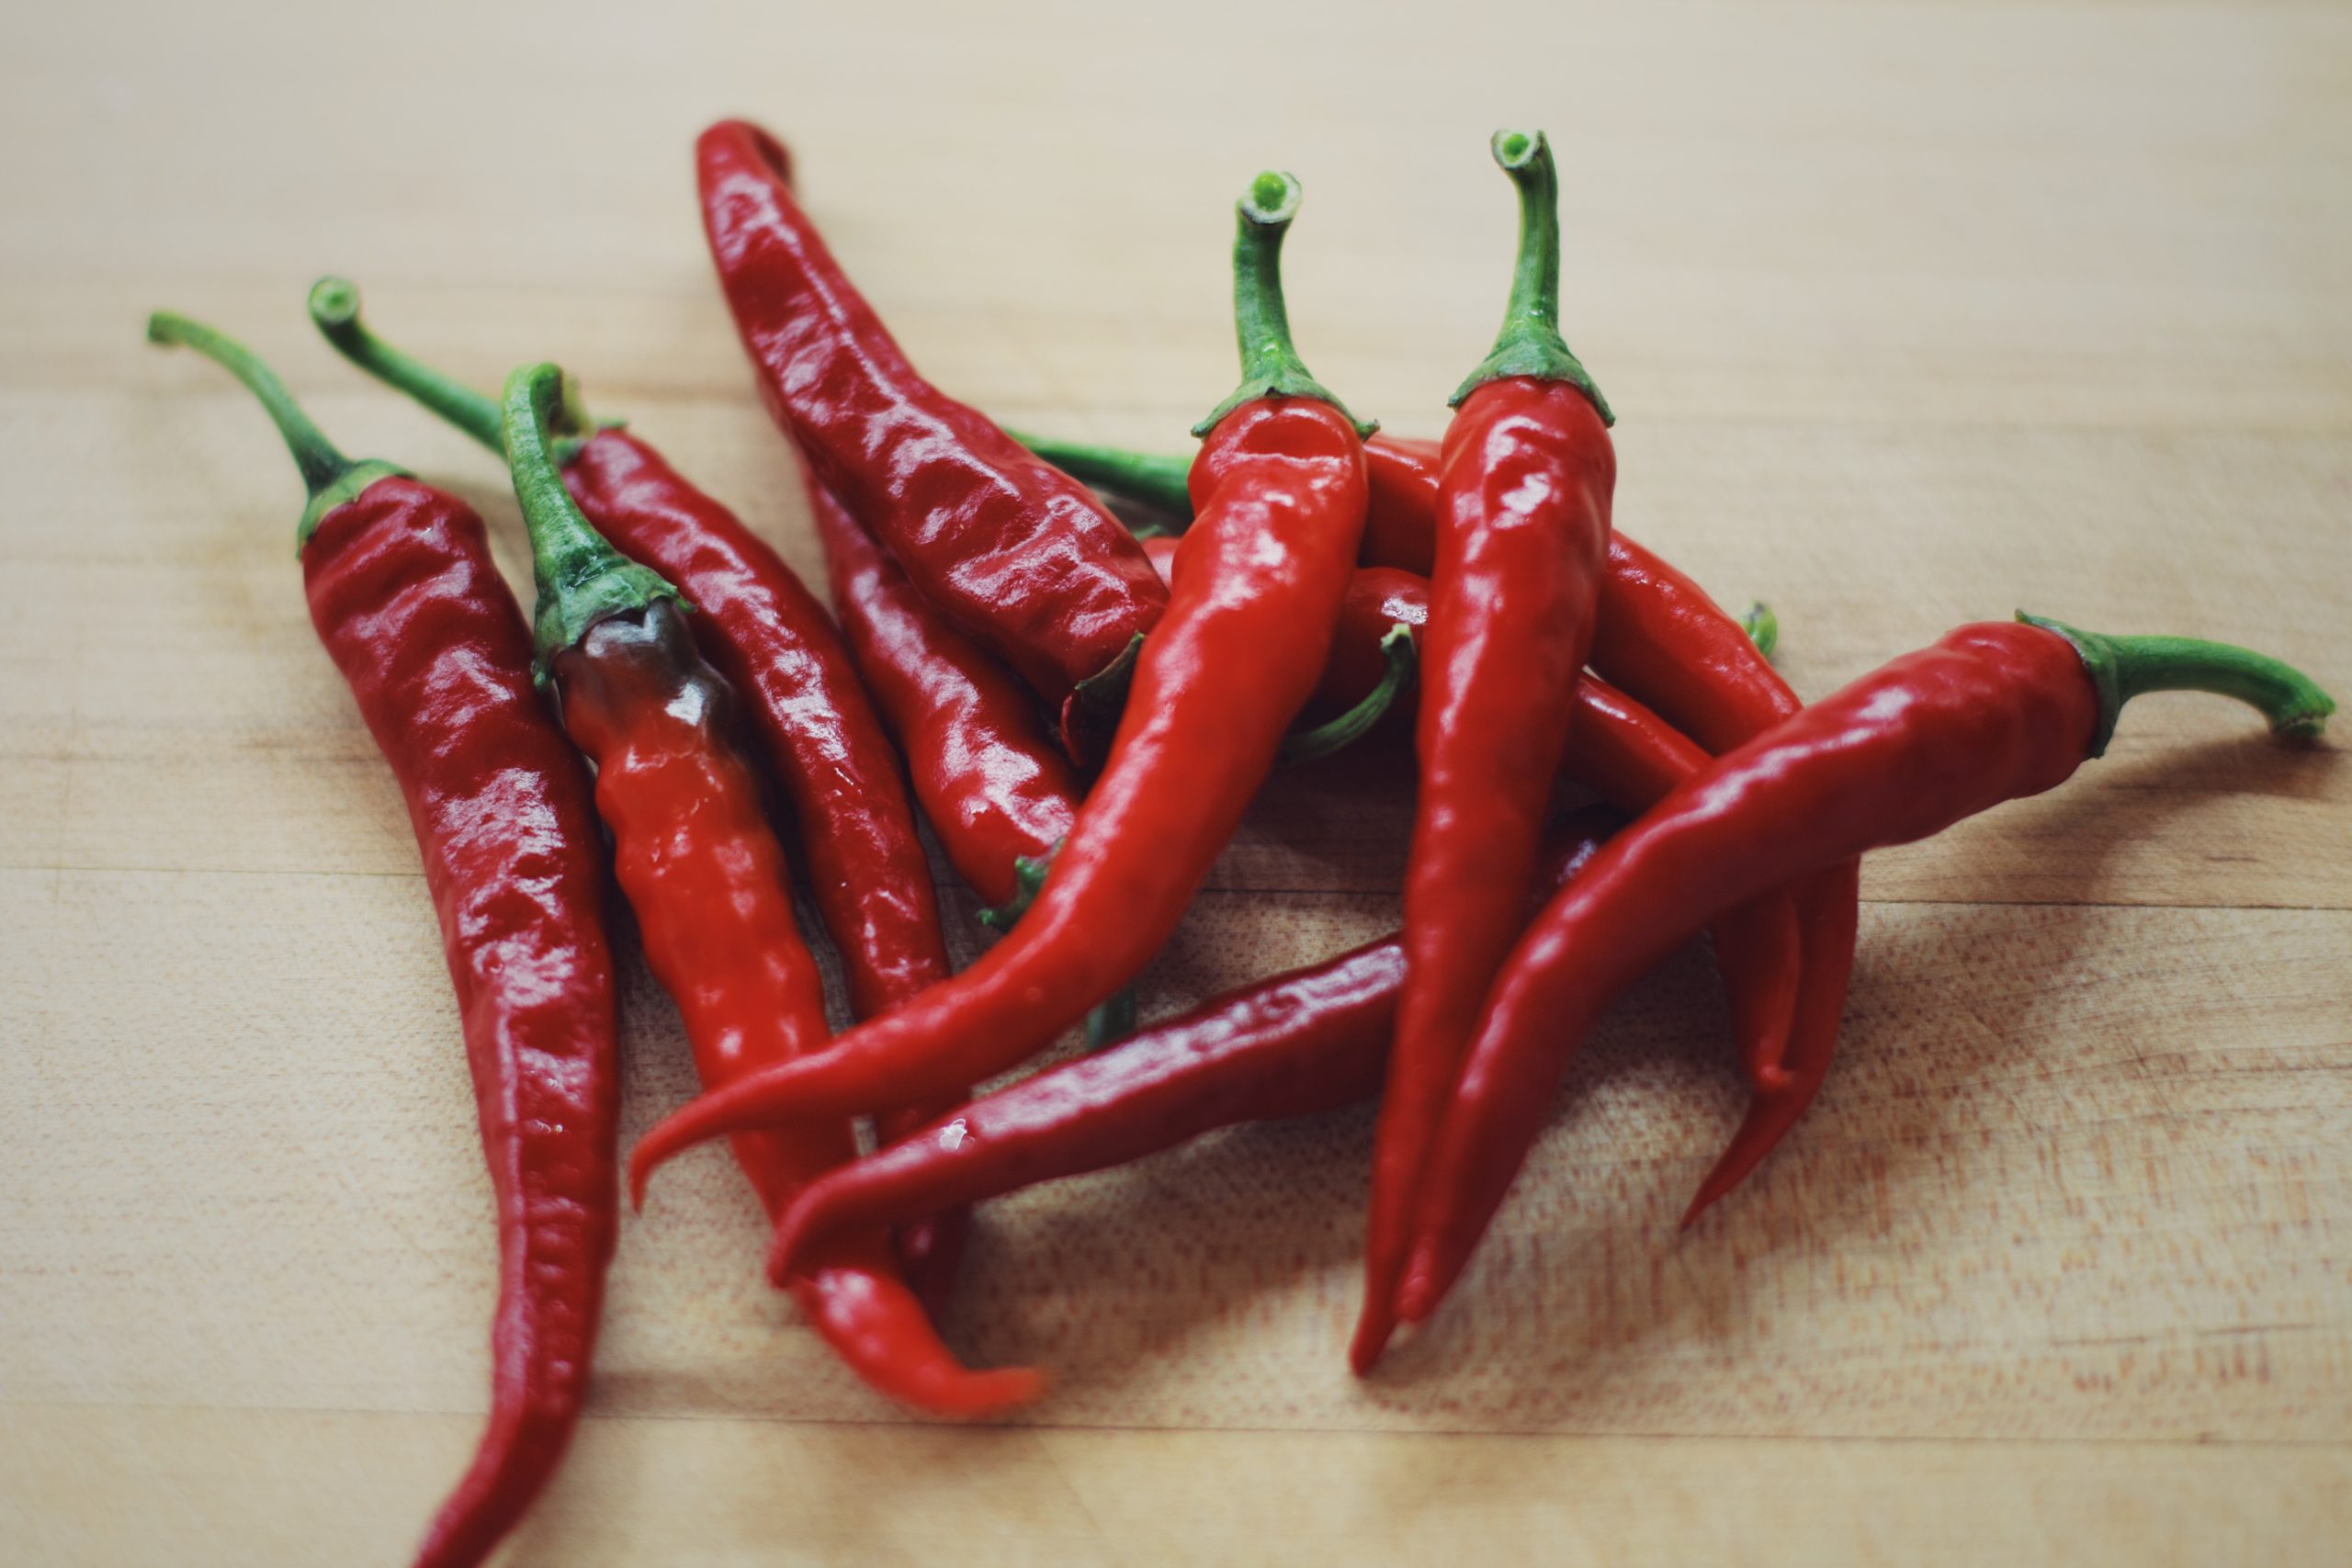 How to Stop Hands Burning From Hot Peppers